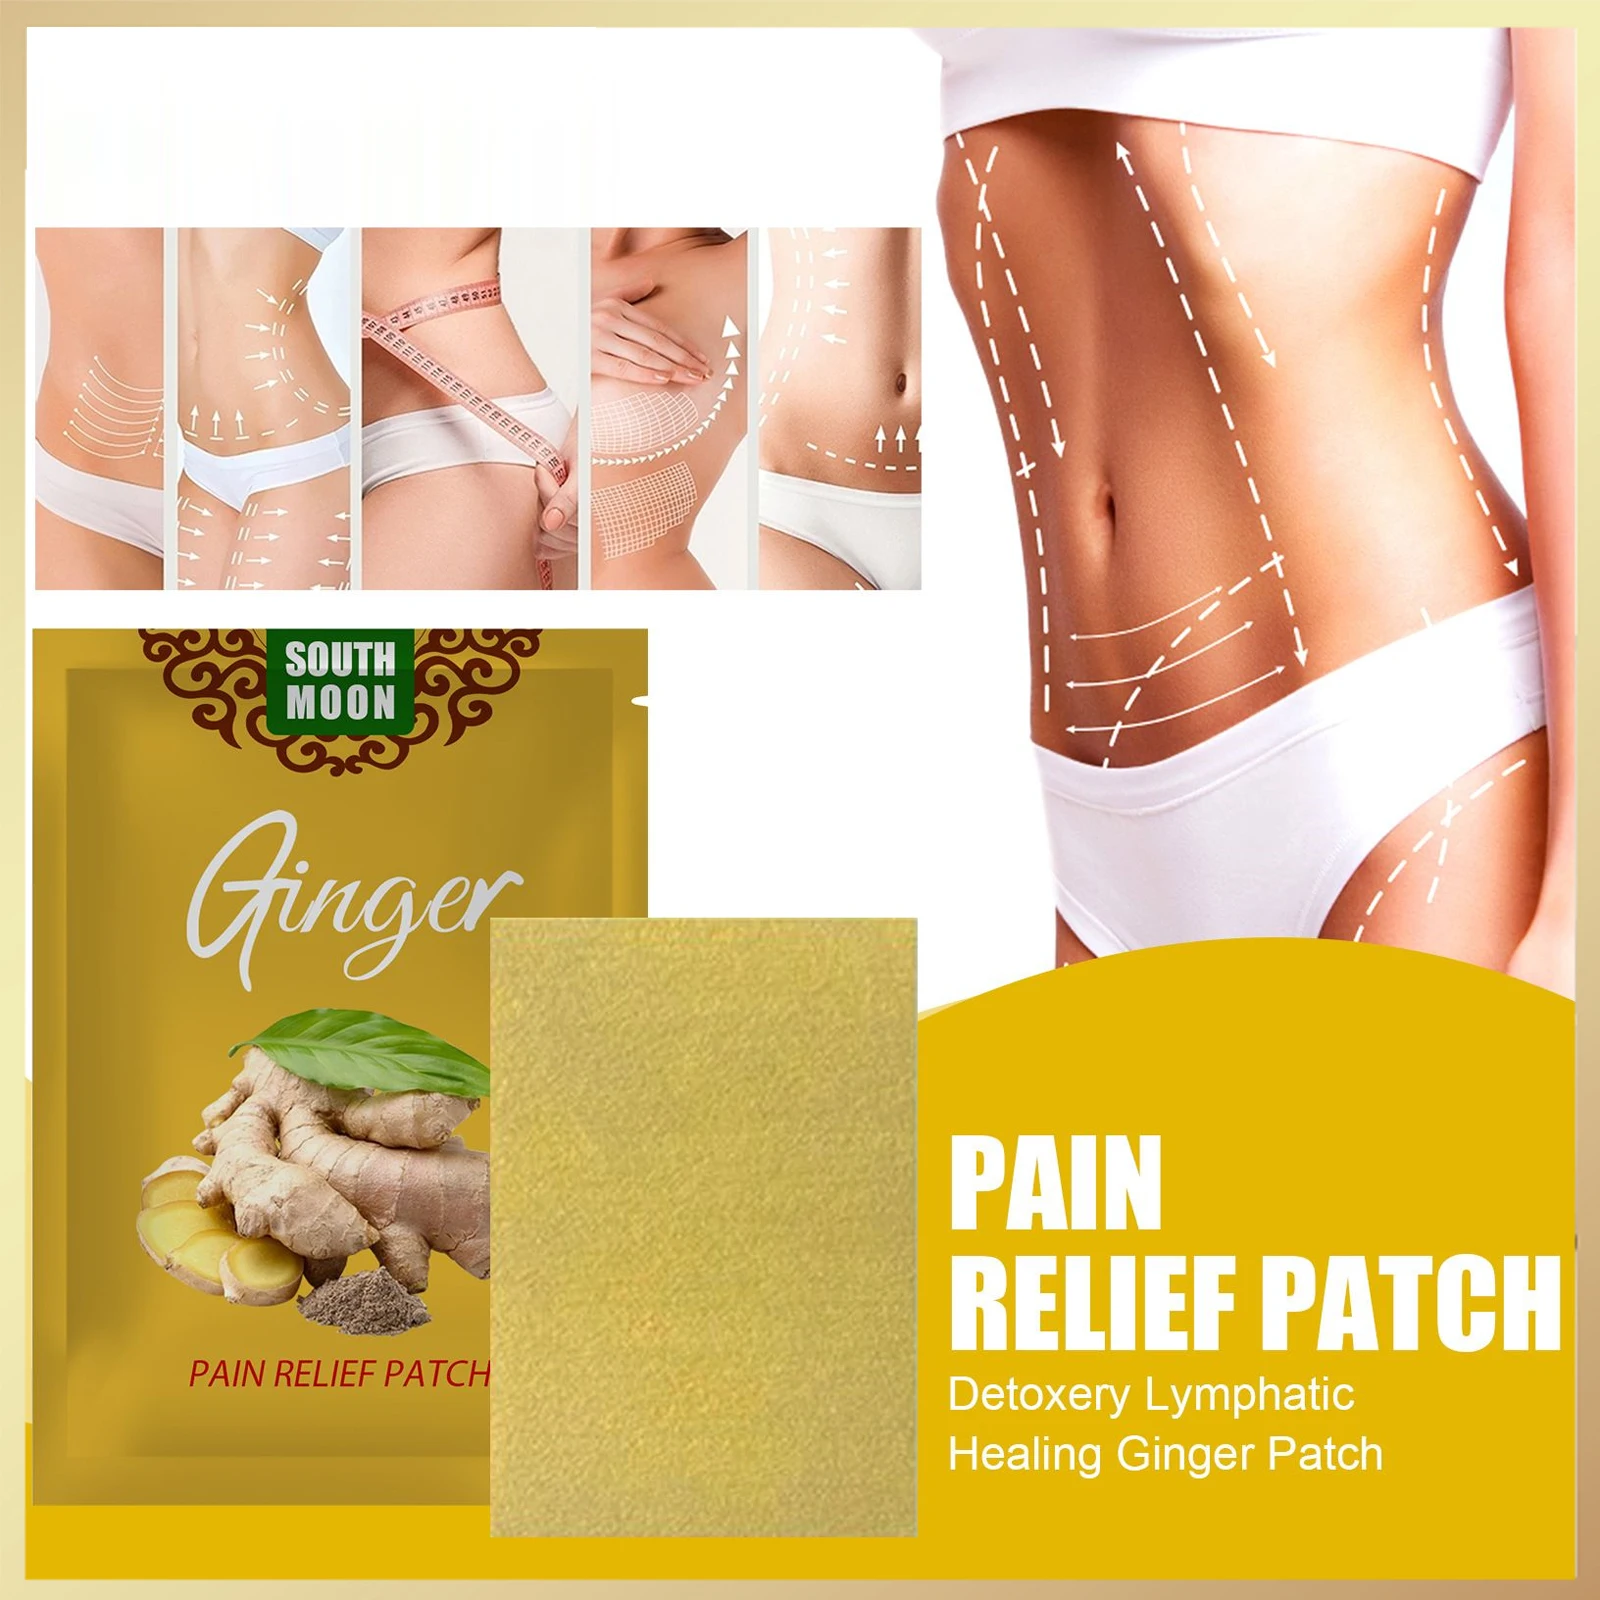 

Ginger Body Sculpting Health Paste Detox Improve Sleep Blood Circulation Firming Big Belly Thighs Slimming Shaping Patch 10pcs